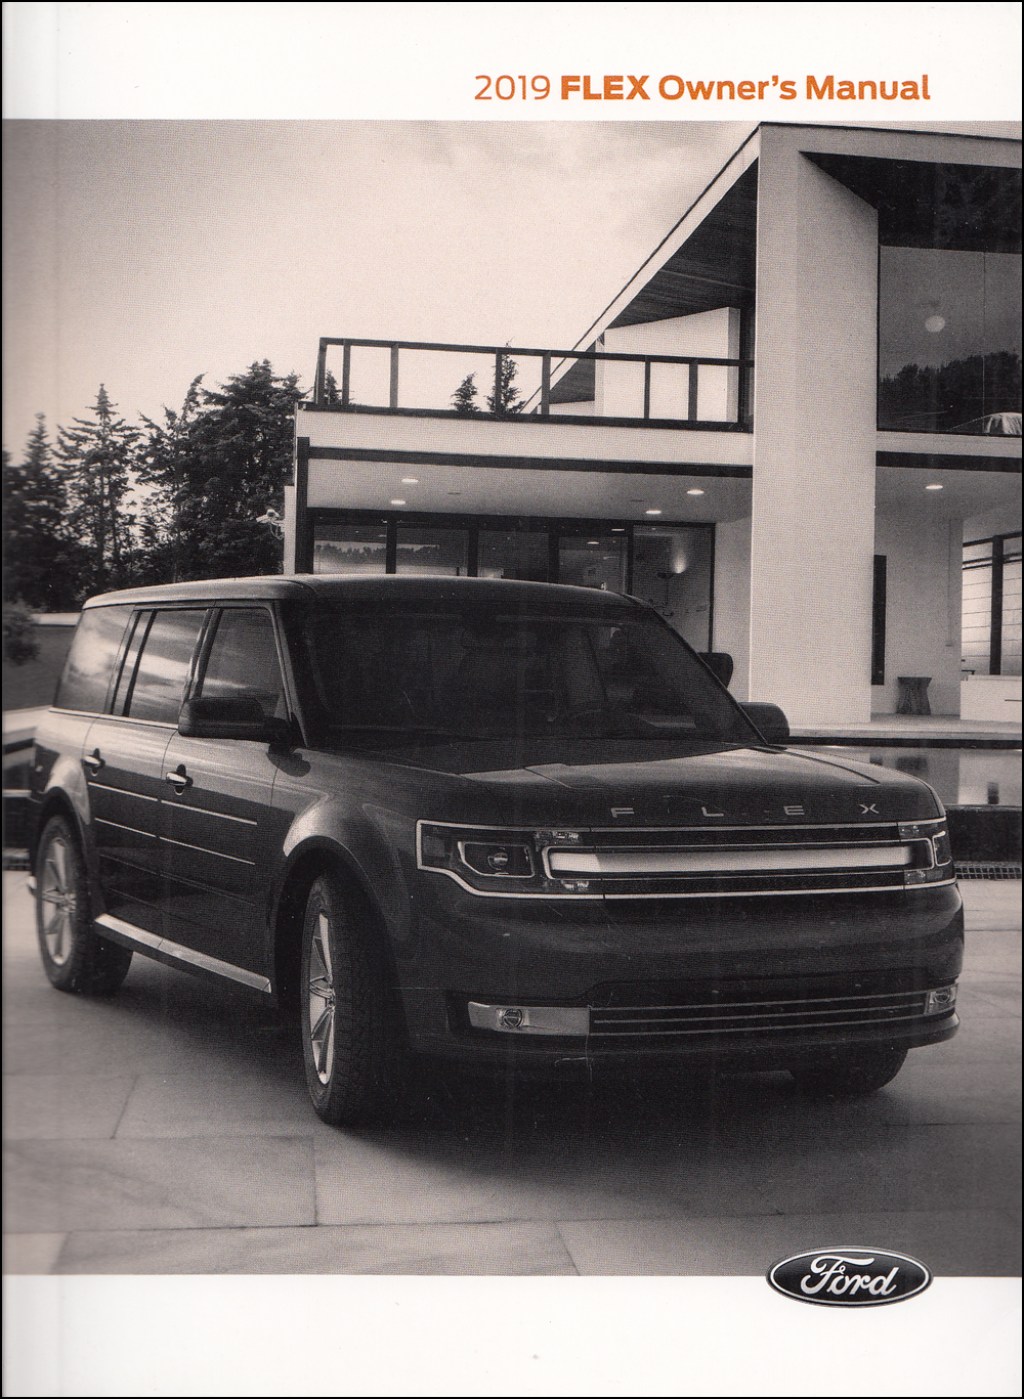 Picture of: Ford Flex Owner’s Manual Original